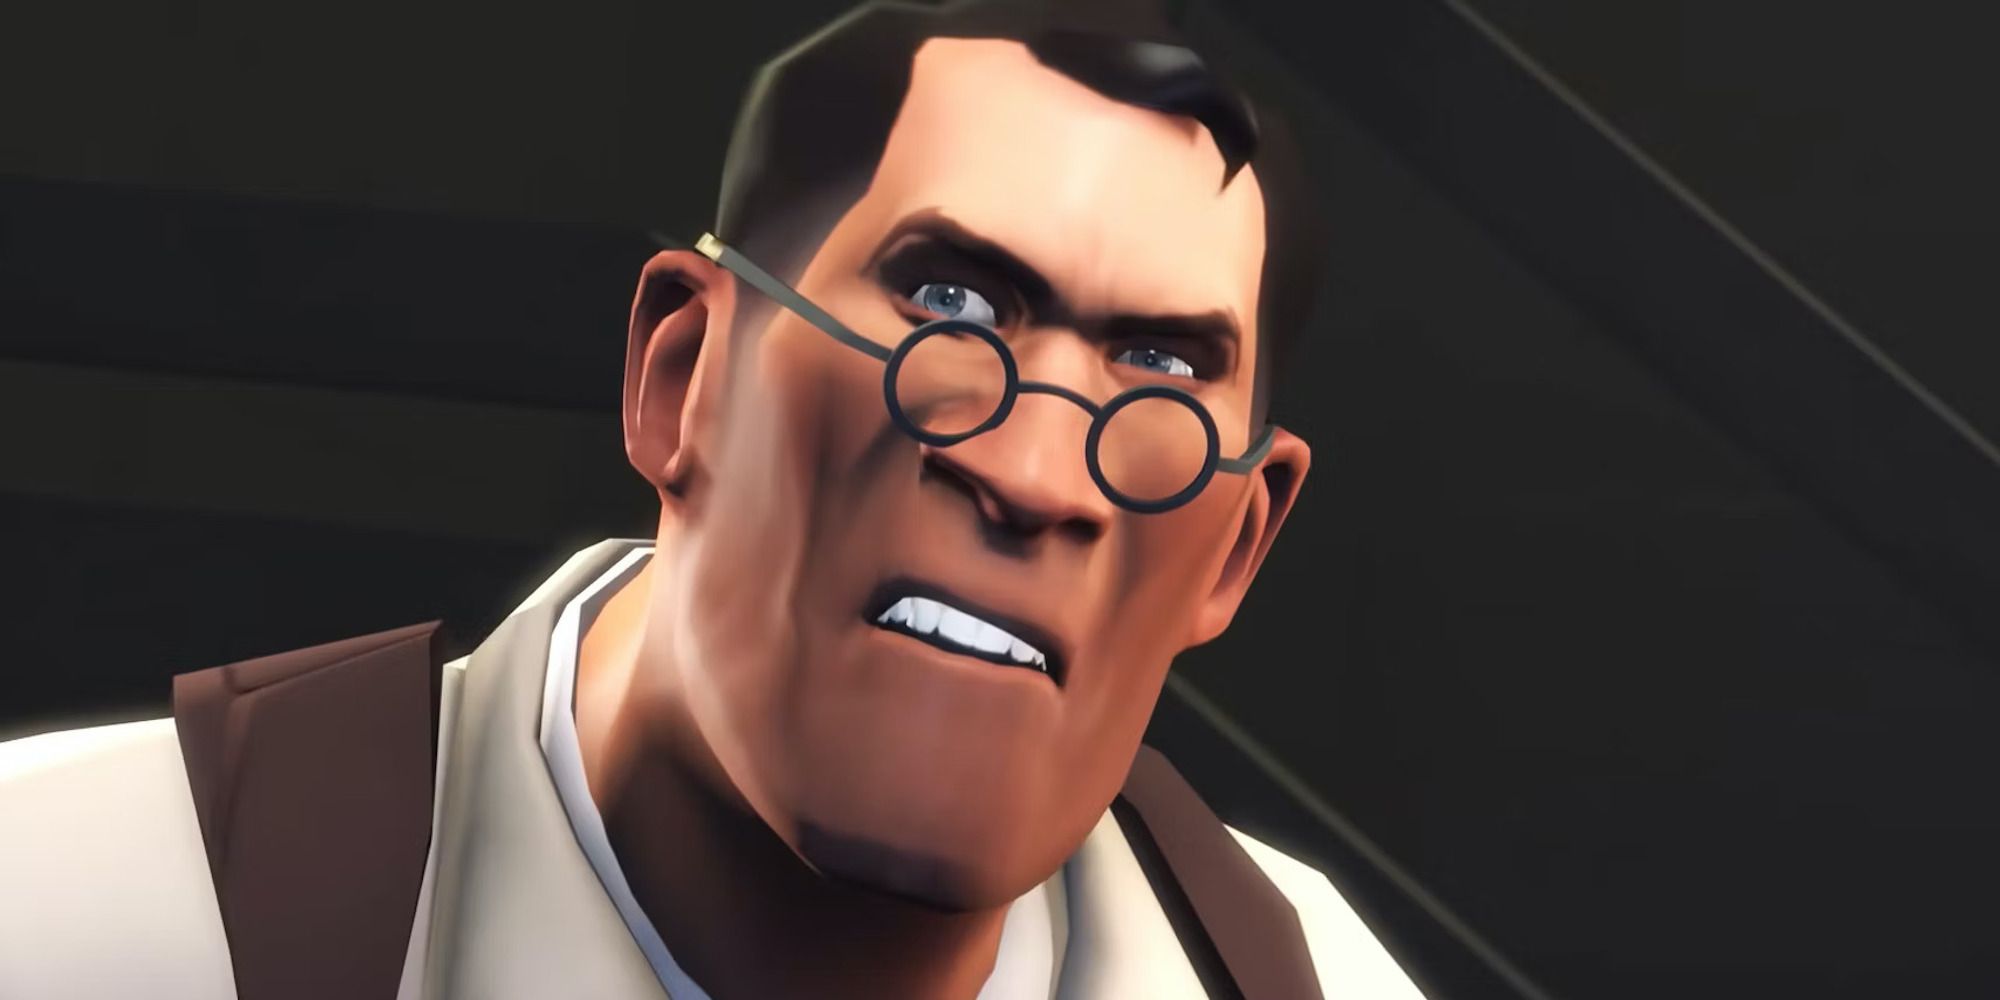 Close up of The Medic from Team Fortress 2